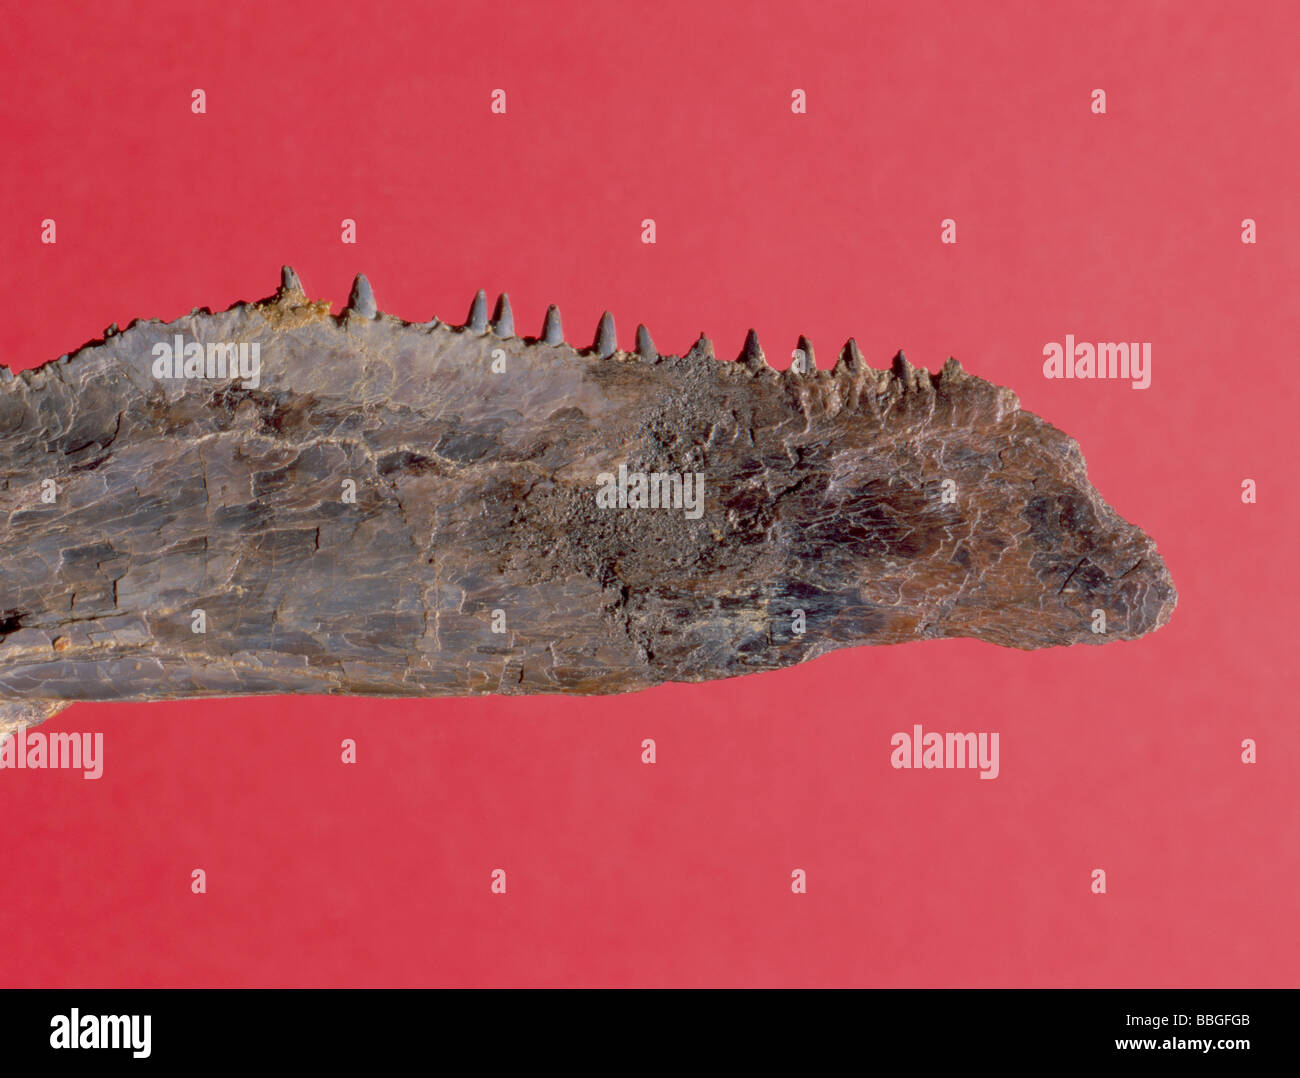 Fossil fish jaw bone (Saurocephalus sp.) from Cretaceous period, Kansas, USA., North America. Length 65mm. Stock Photo